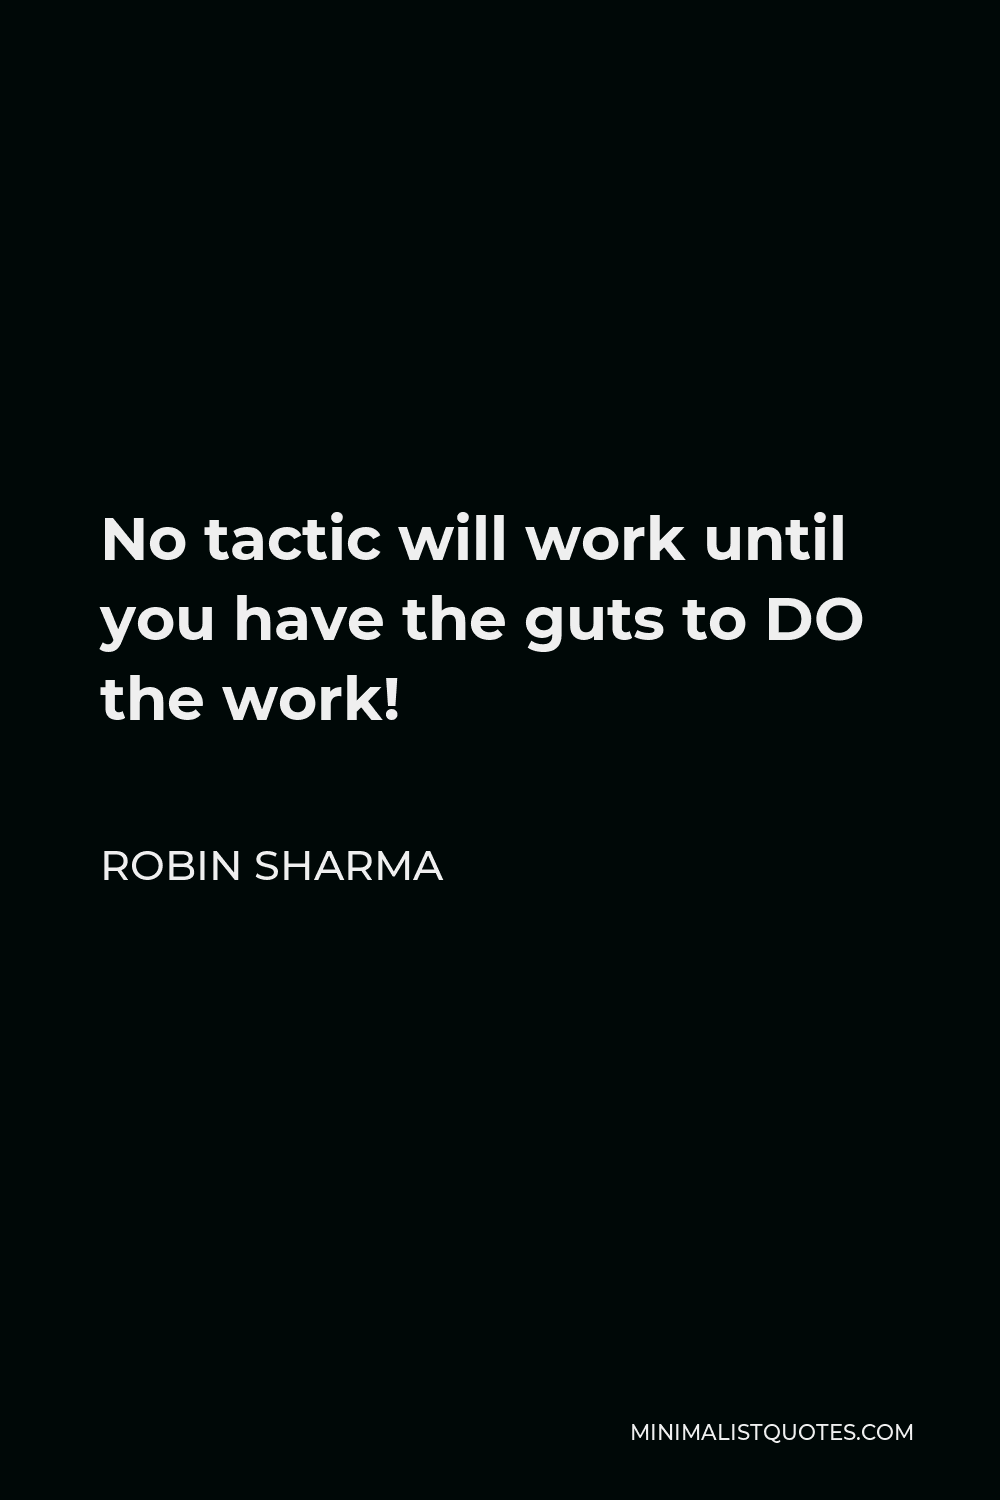 Robin Sharma Quote - No tactic will work until you have the guts to DO the work!